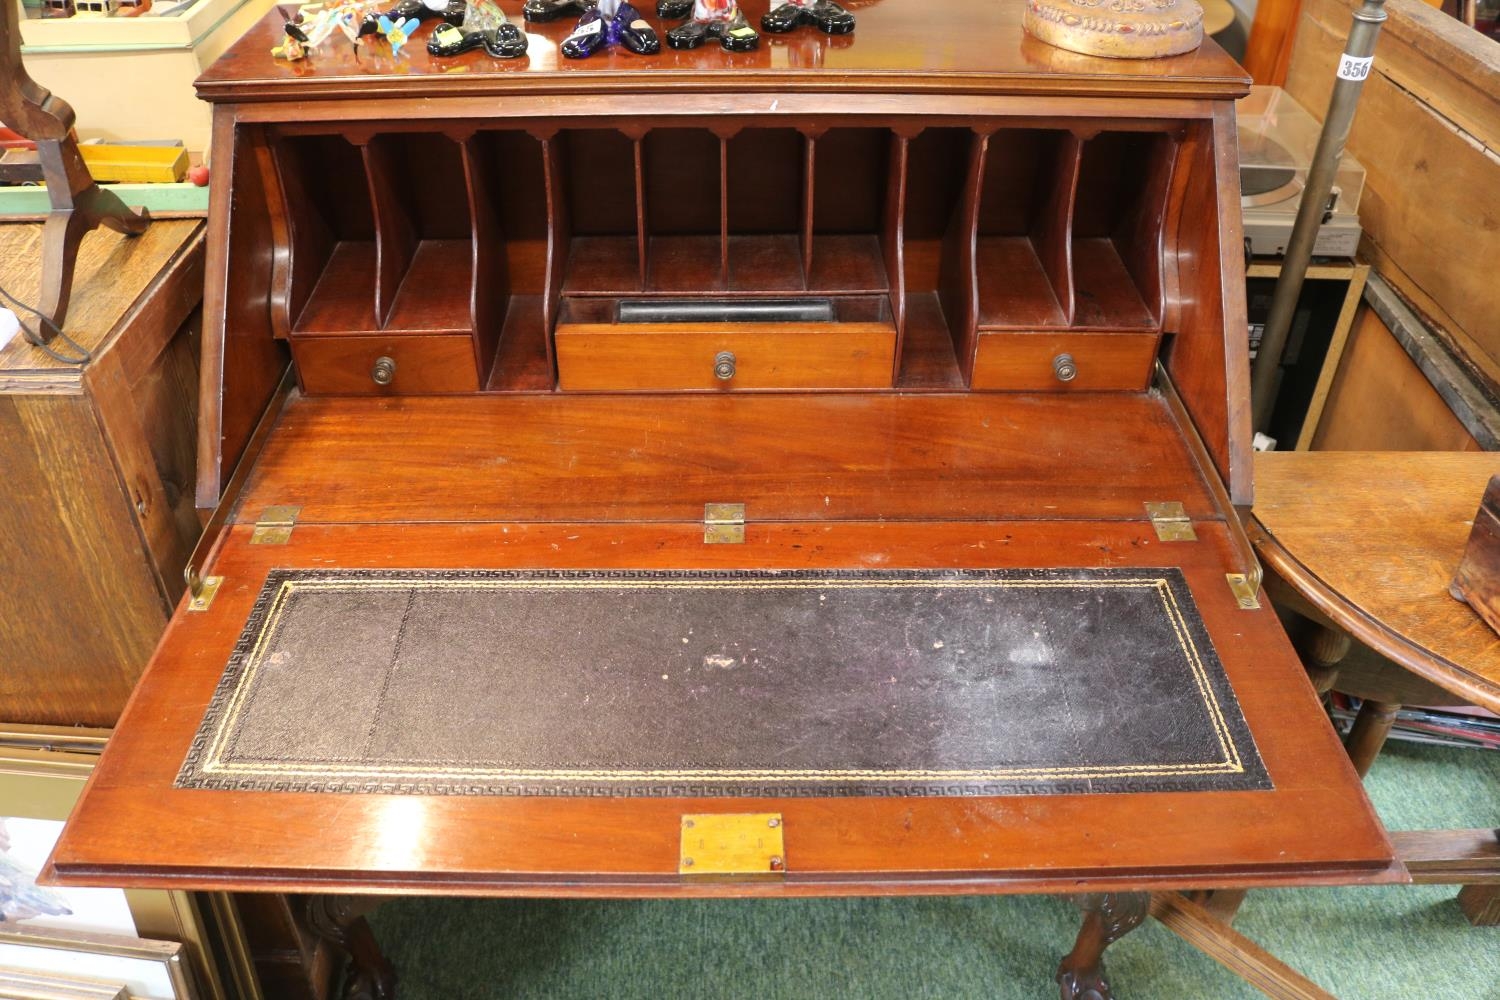 Edwardian Mahogany fall front bureau with metal drop handles over ball and claw feet - Image 4 of 4